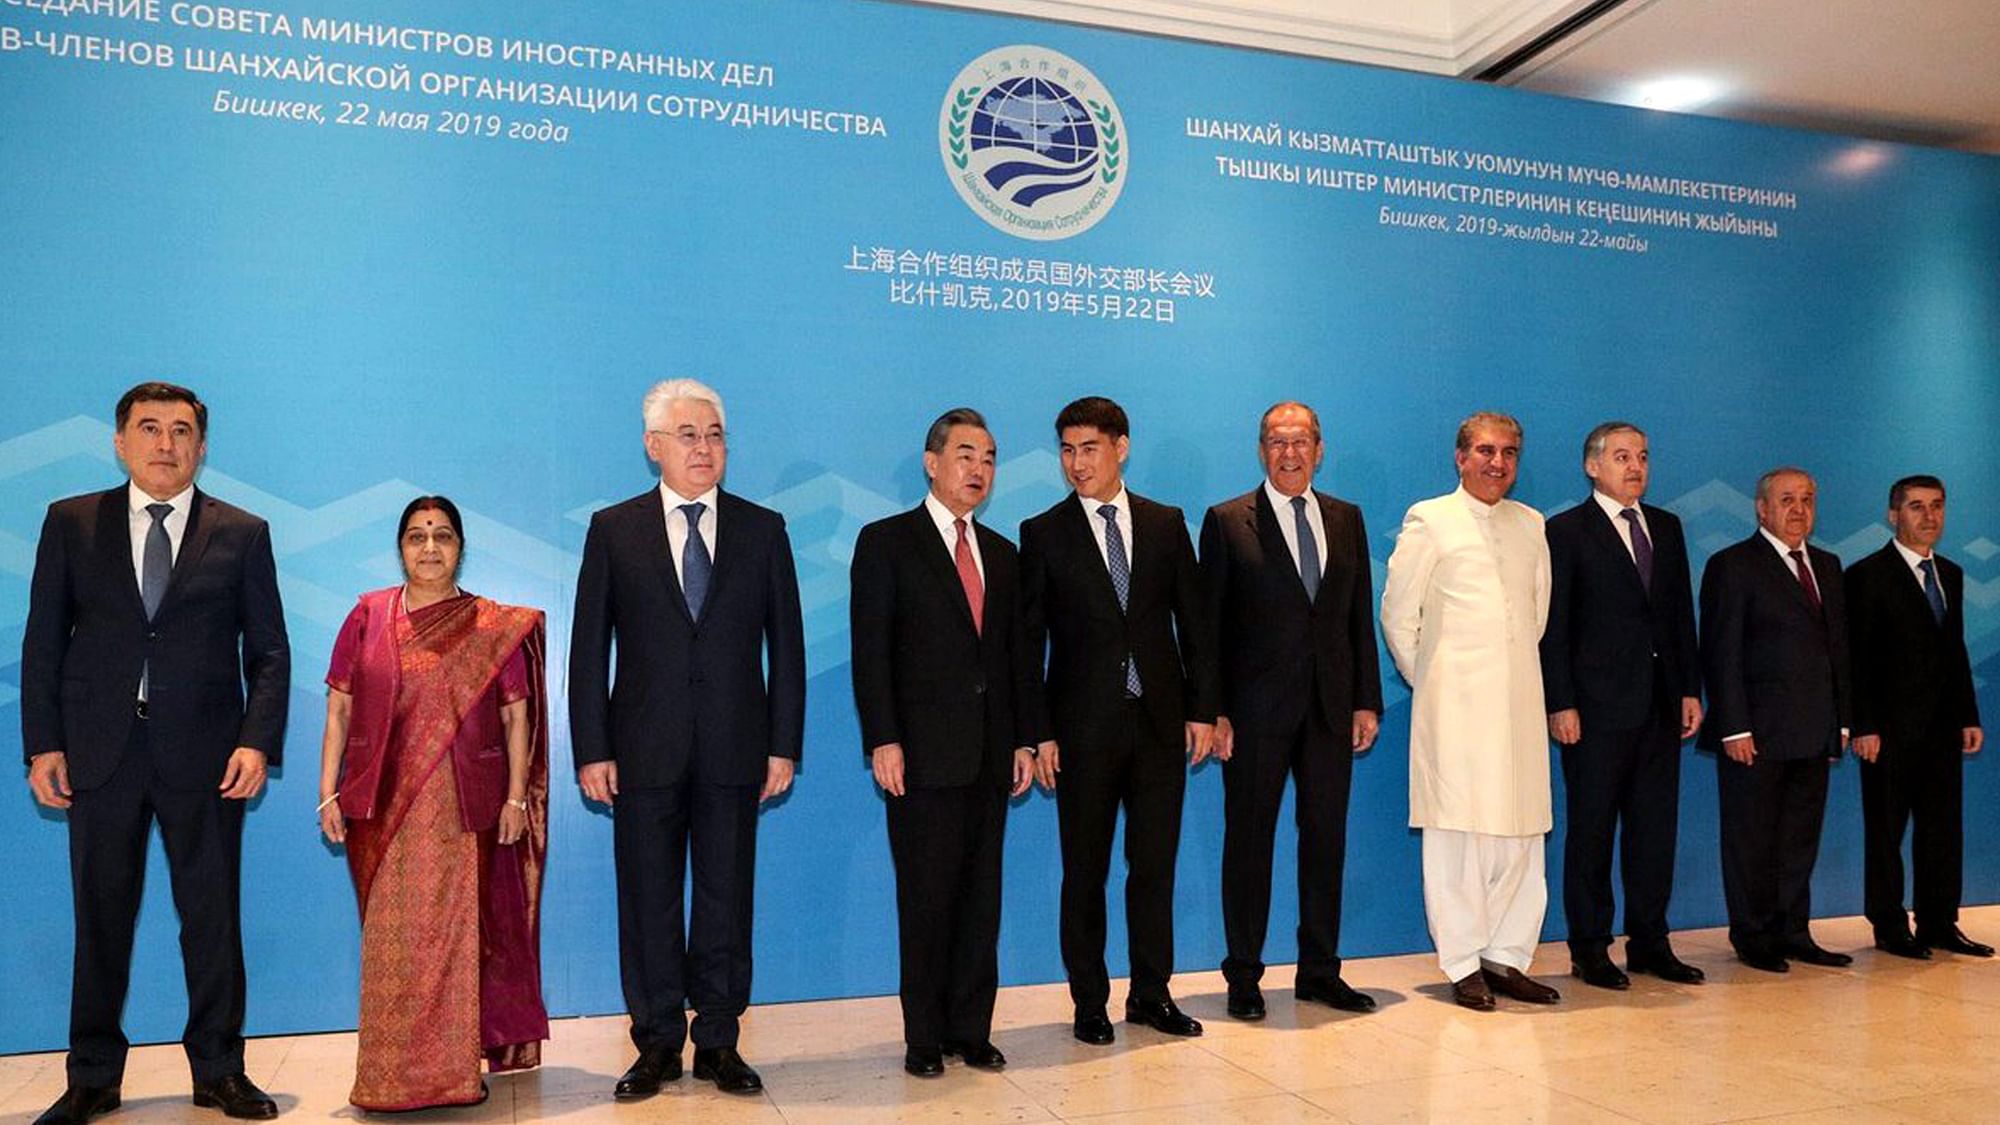  External Affairs Minister Sushma Swaraj attends the meeting of Shanghai Cooperation Organisation (SCO) Council of Foreign Ministers, in Bishkek, Kyrgyzstan.